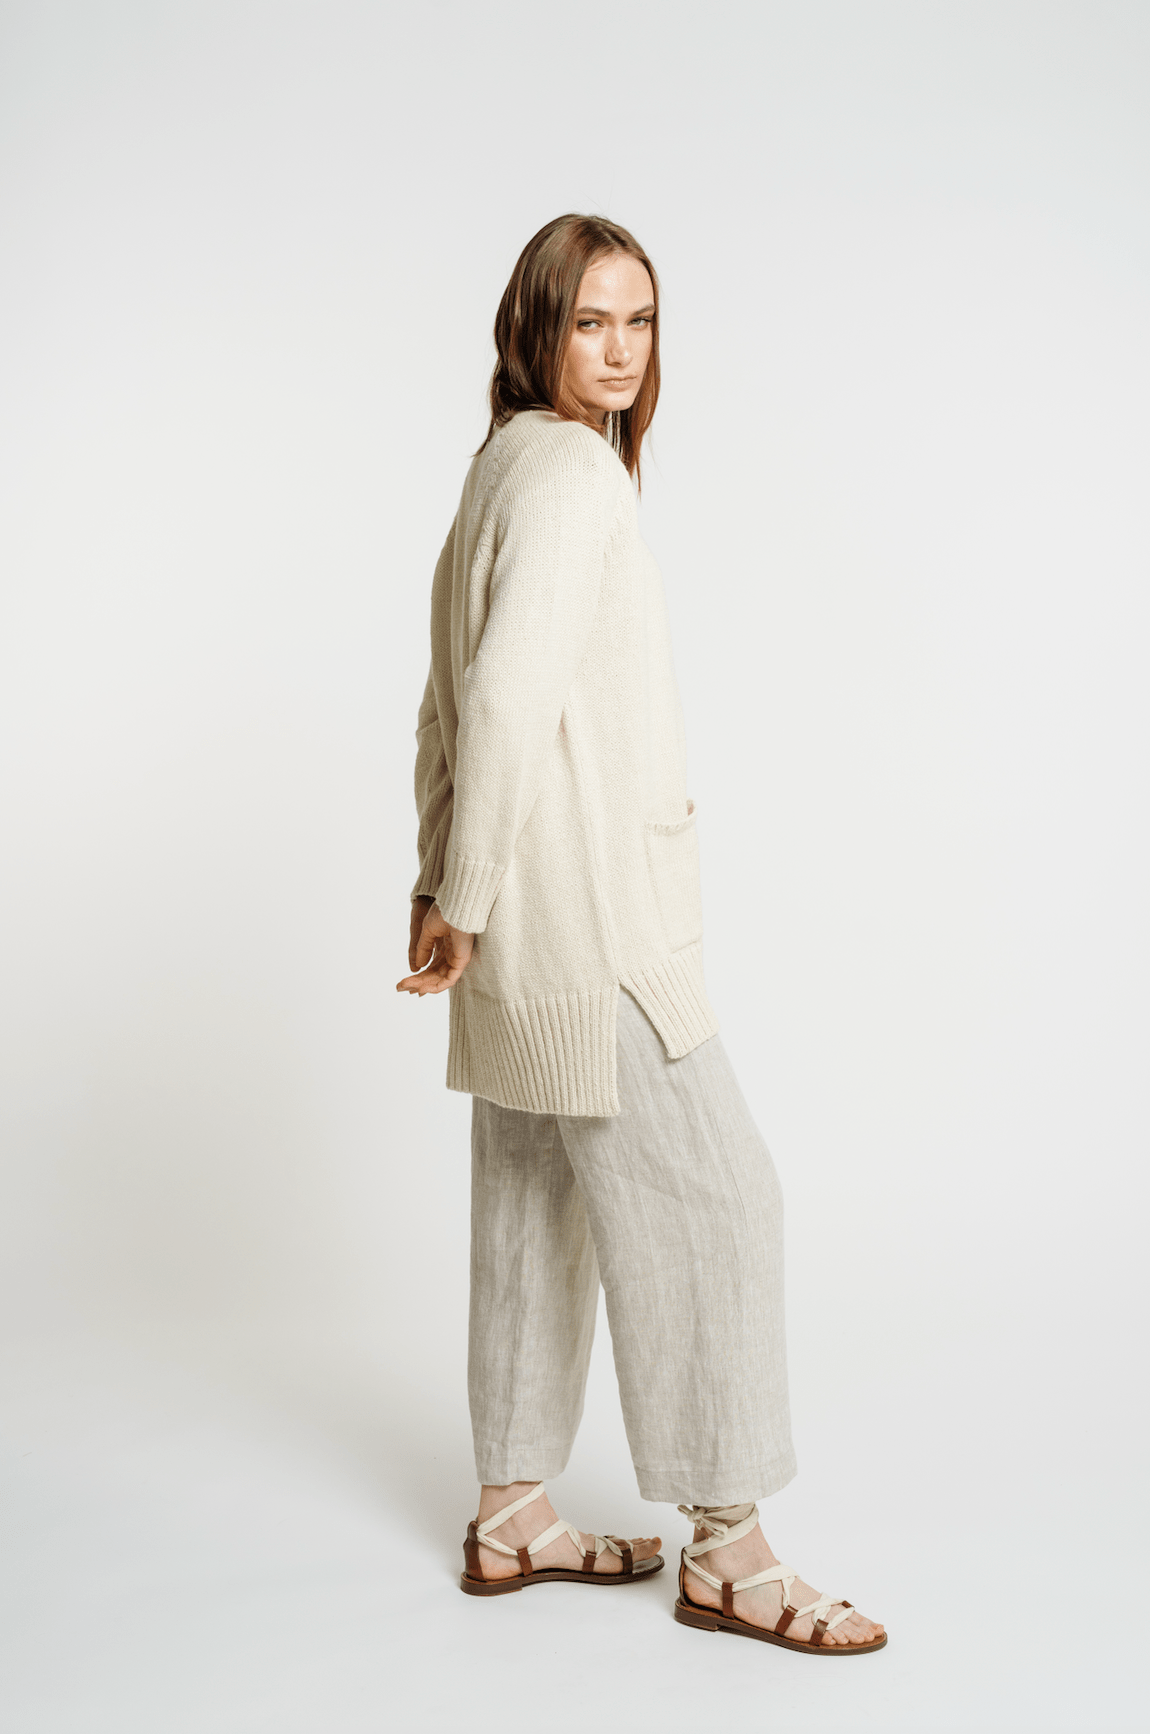 The model is wearing a Valley Cardigan - Vanilla and pants.